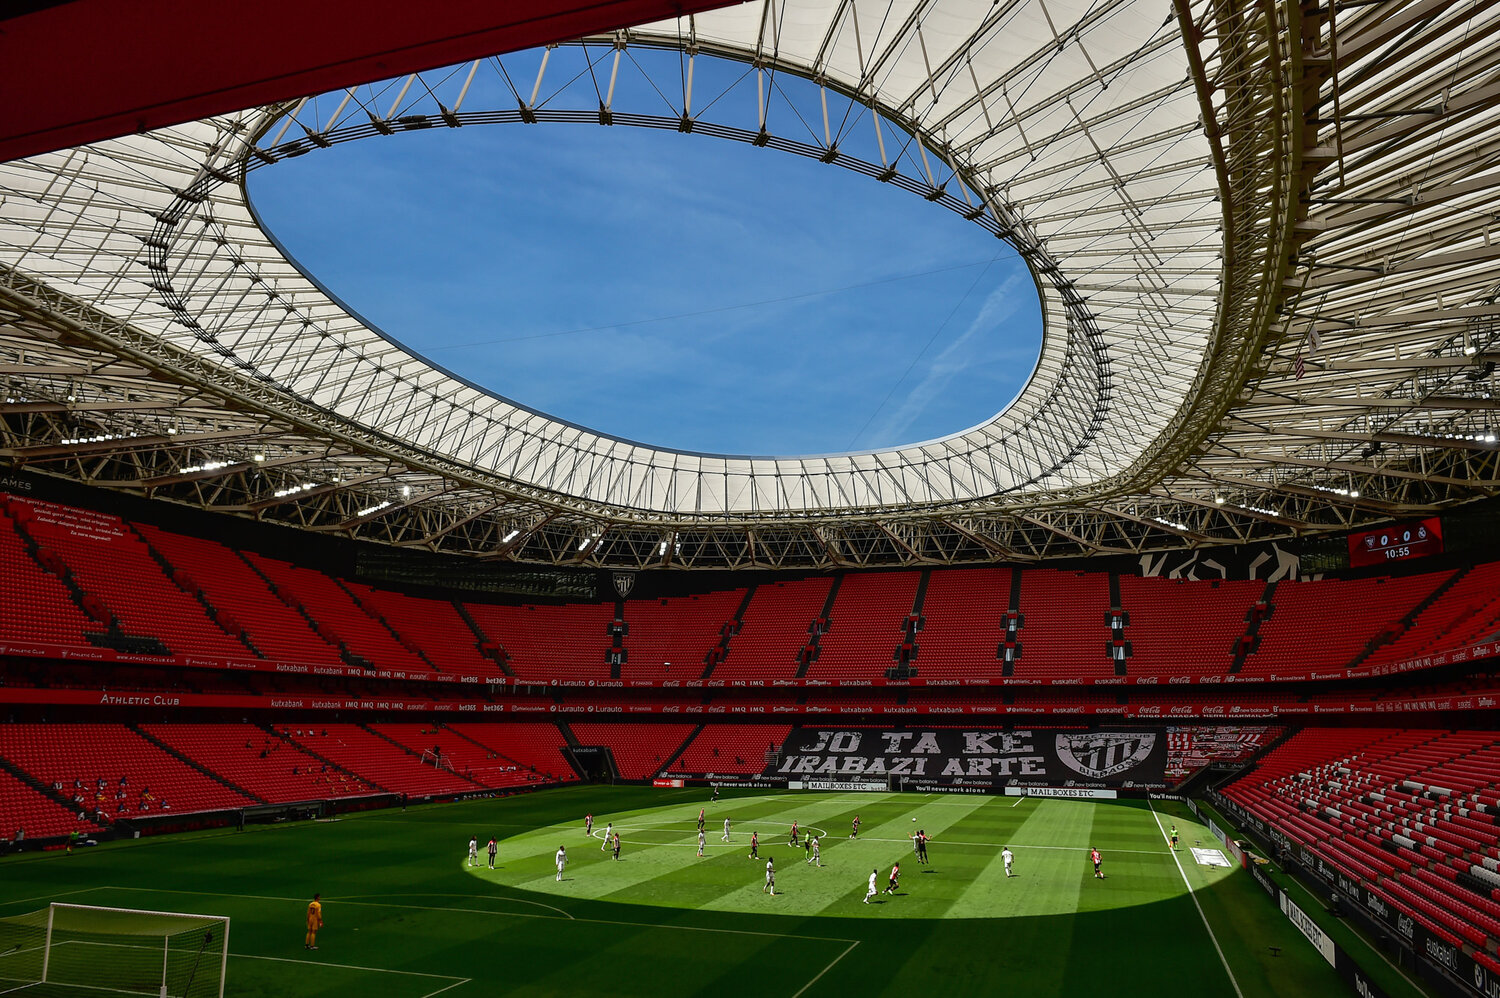  Athletic Club and Real Madrid play during their Spanish La Liga soccer match at the San Manes stadium, which is nearly empty, in Bilbao, Spain, on July 5, 2020. (AP Photo/Alvaro Barrientos) 